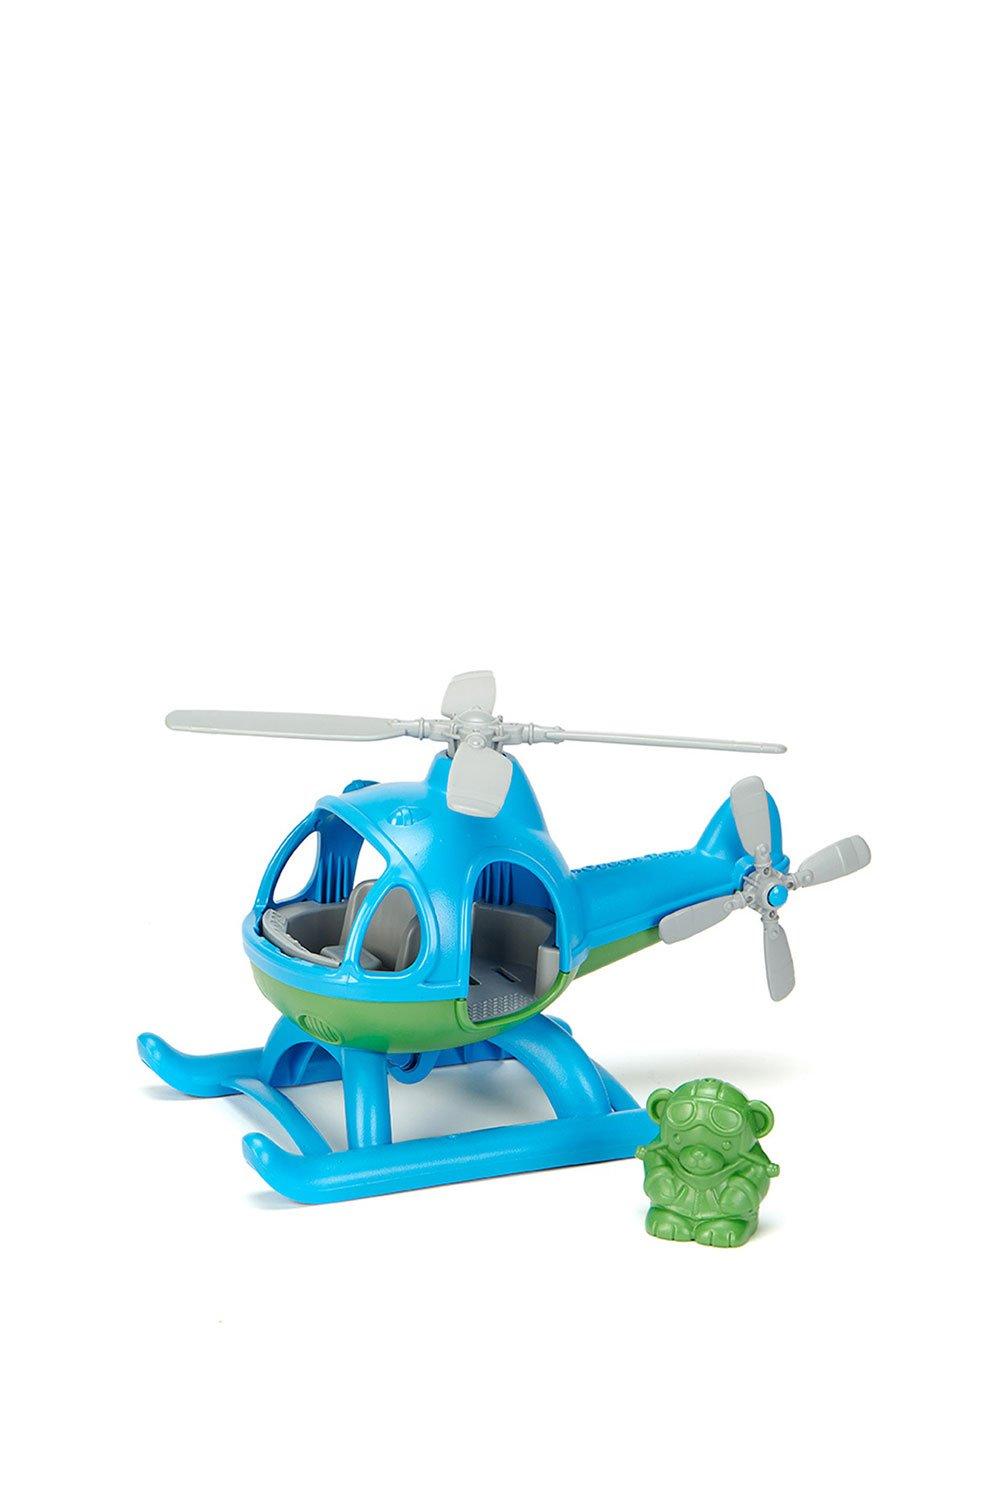 Green Toys Helicopter|blue